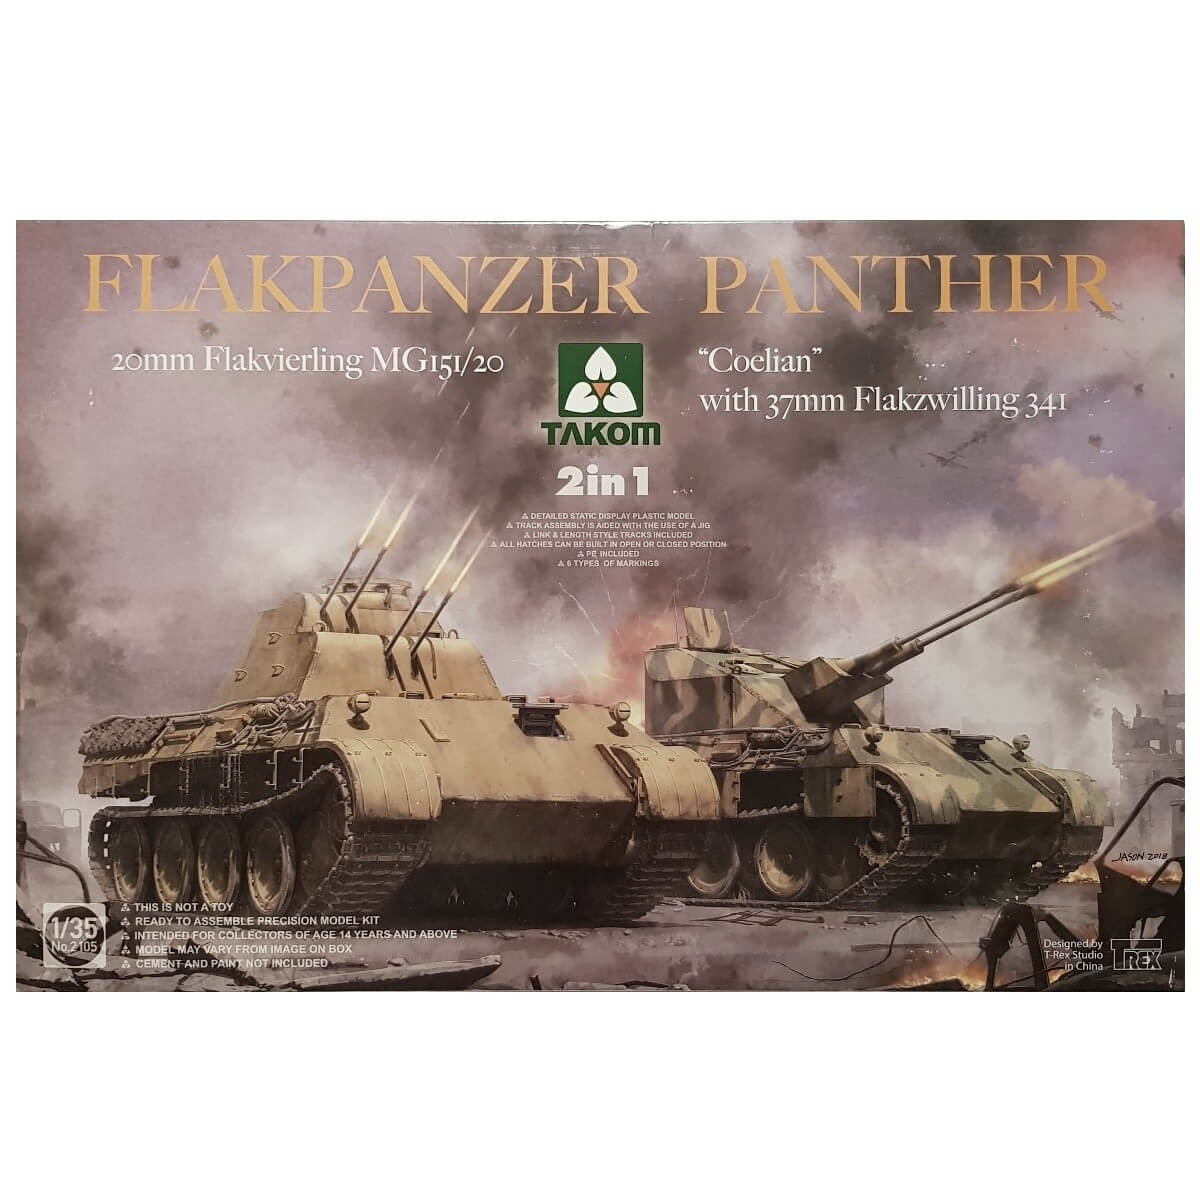 1:35 Flakpanzer Panther 20mm Flakvierling MG 151/20 - COELIAN with 37mm Flakzwilling 341 - TAKOM